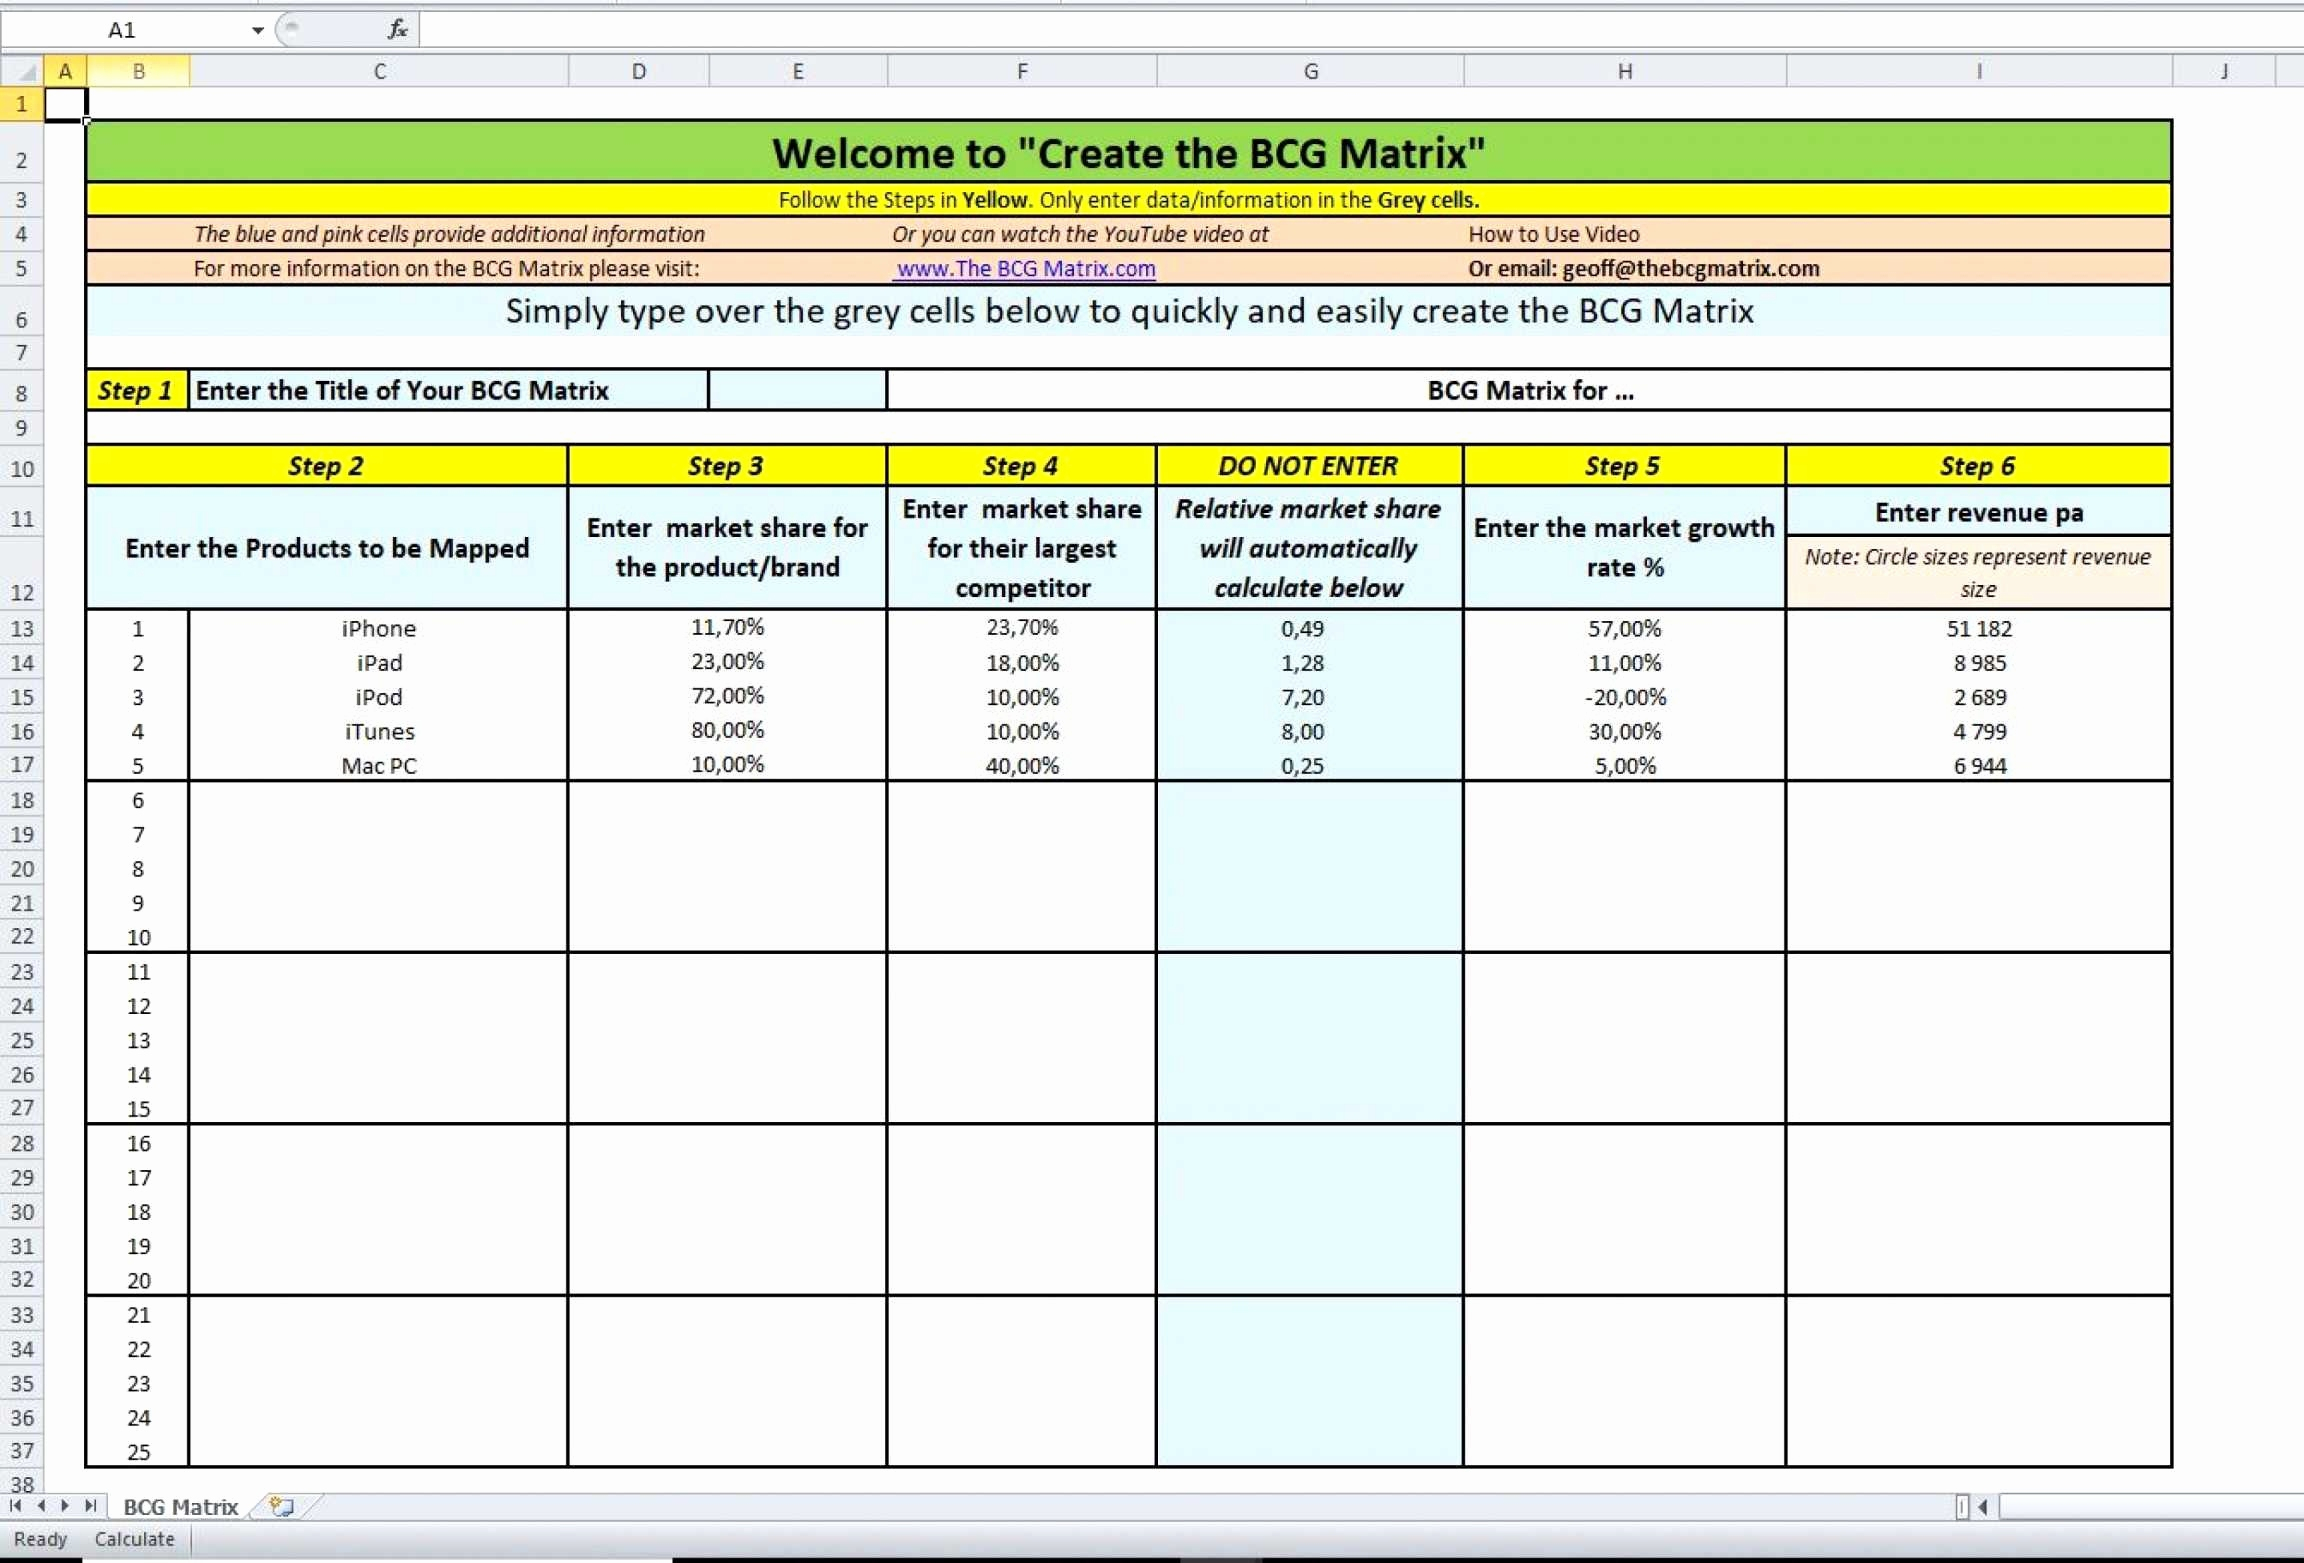 Computer Hardware Inventory Excel Template Elegant Spreadsheet Throughout Hardware Inventory Management Excel Template